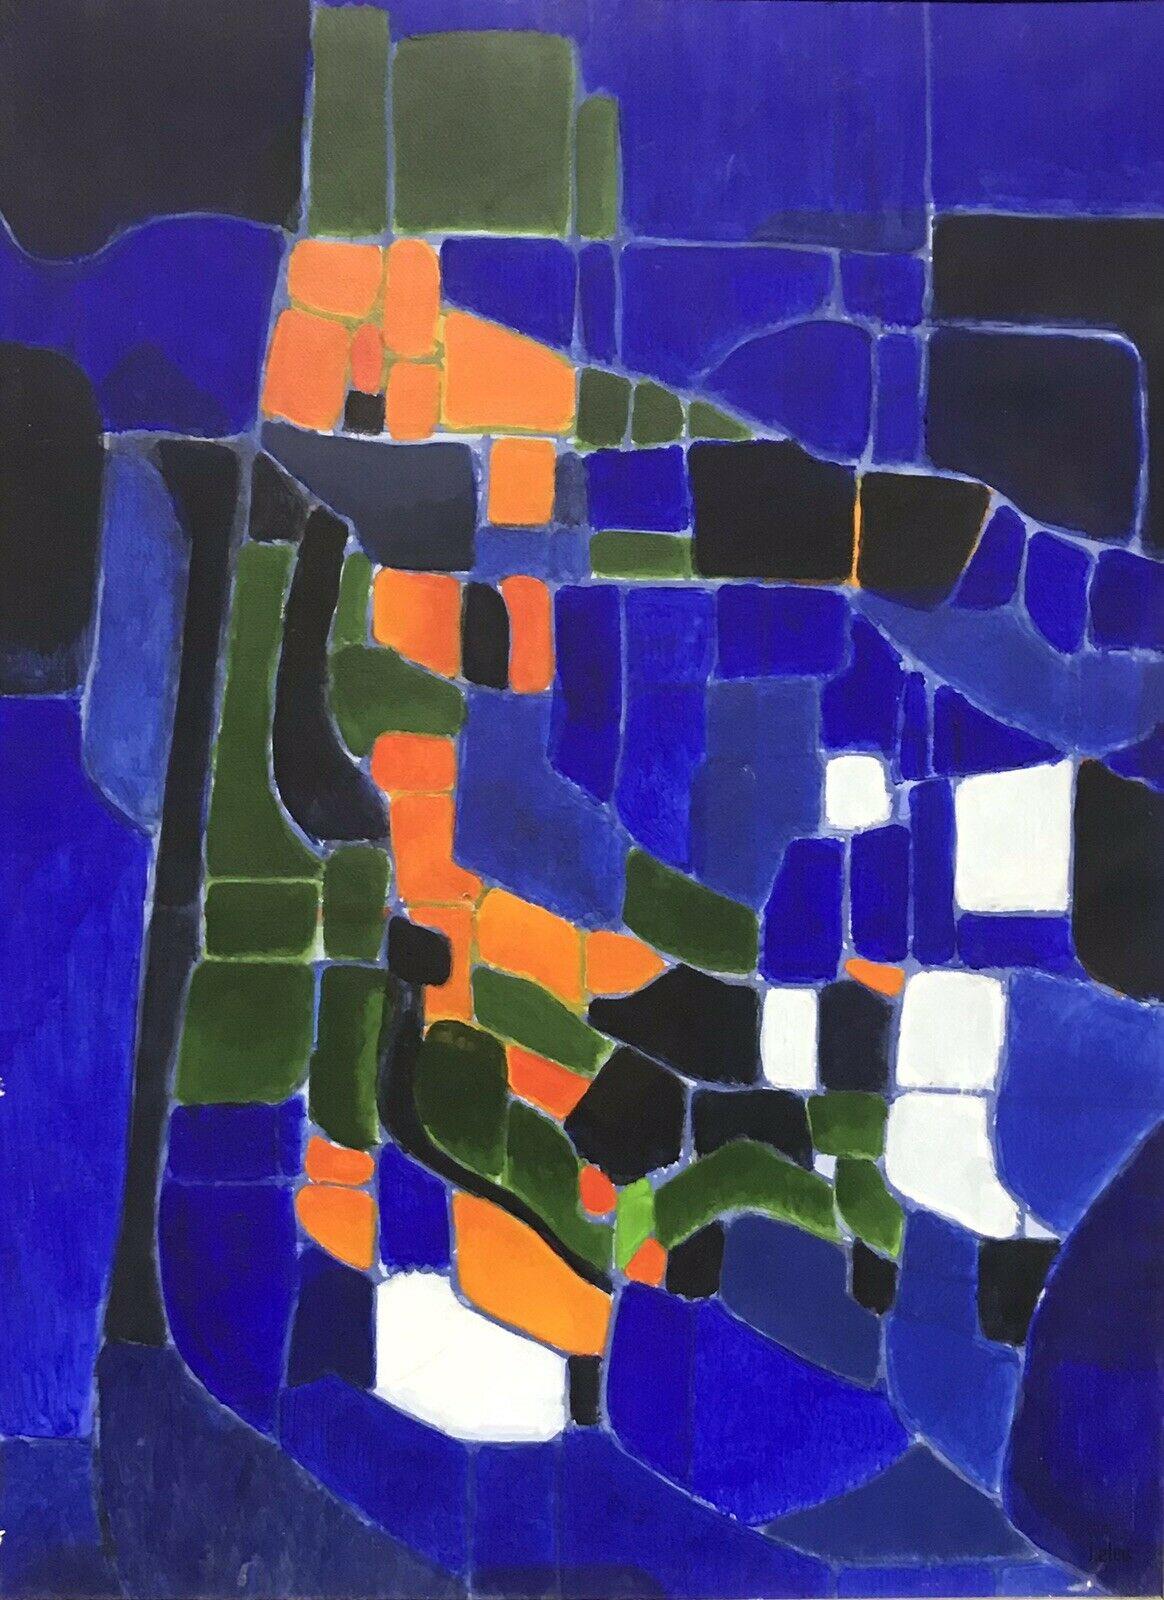 French cubist Abstract Painting - 1980's FRENCH CUBIST ABSTRACT SIGNED OIL PAINTING - DEEP BLUE GREEN ORANGE BLACK